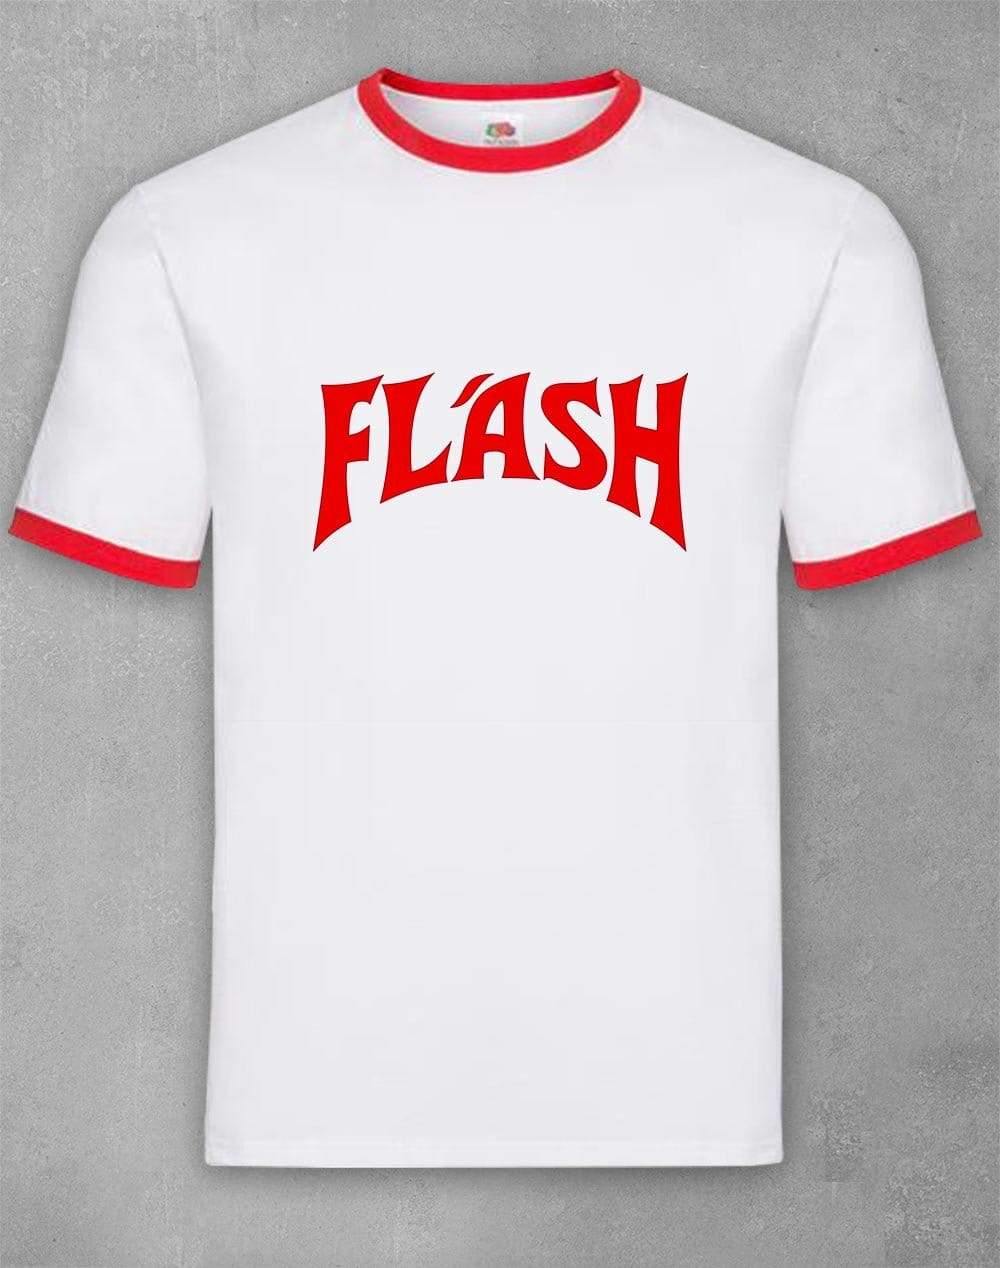 Classic Flash Ringer T-Shirt S / White Red  - Off World Tees